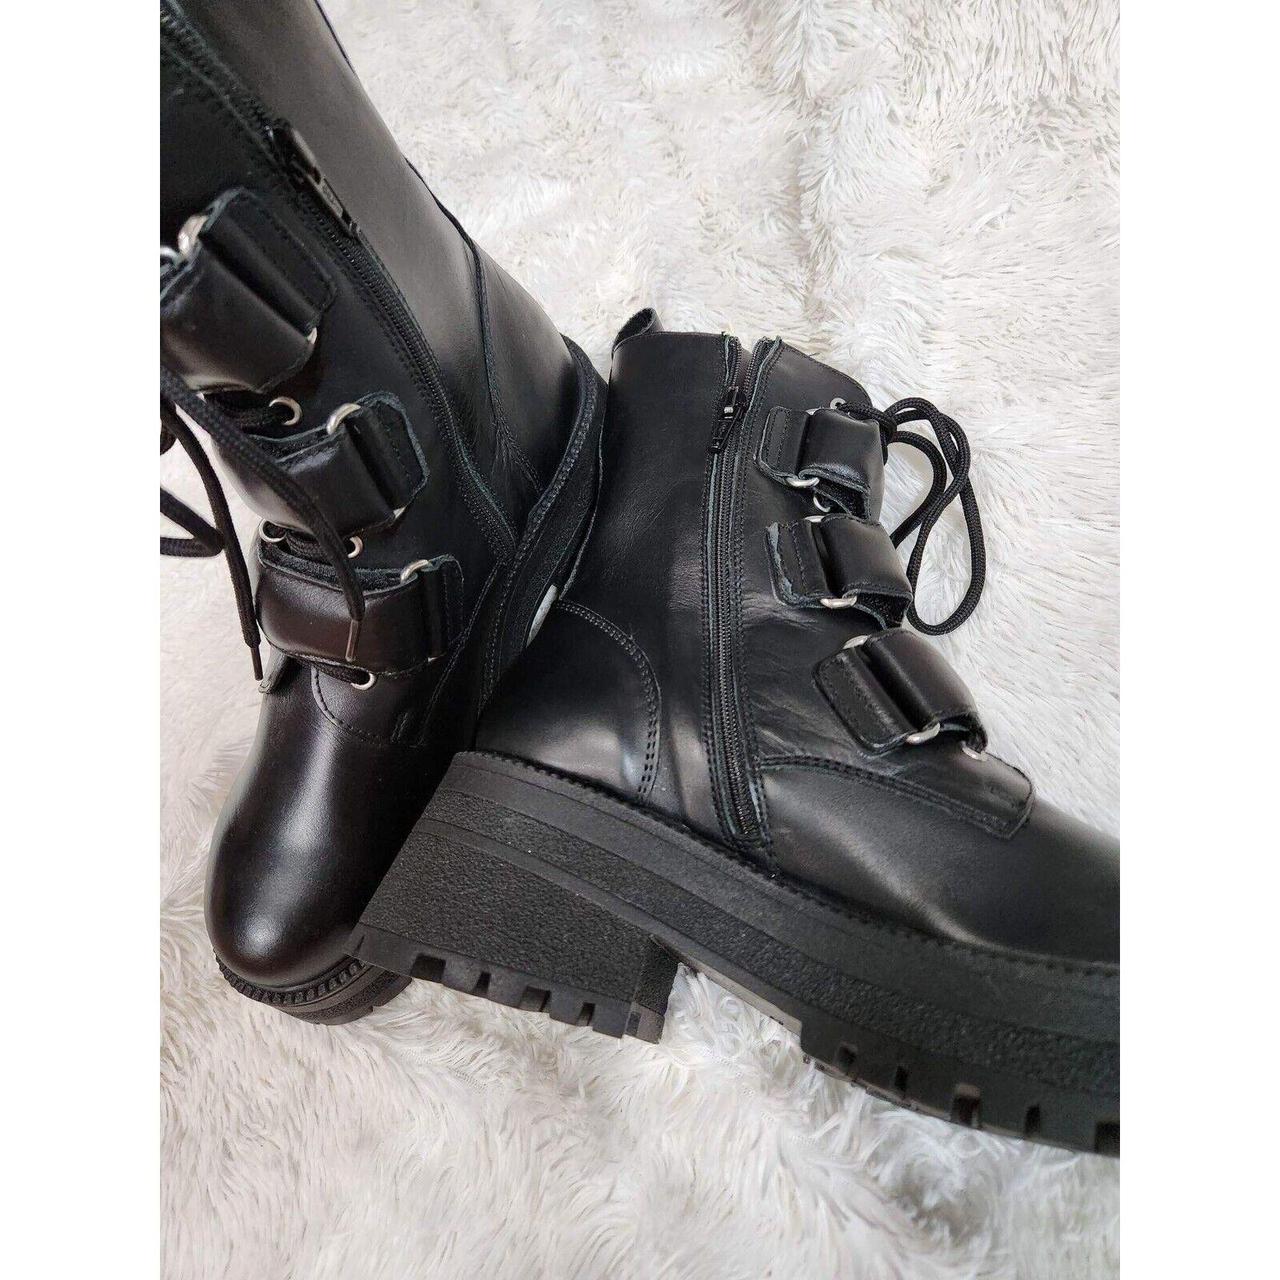 New Free People Emmett Strap Lace-Up Boots Size 9 MSRP: $268 Leather latte